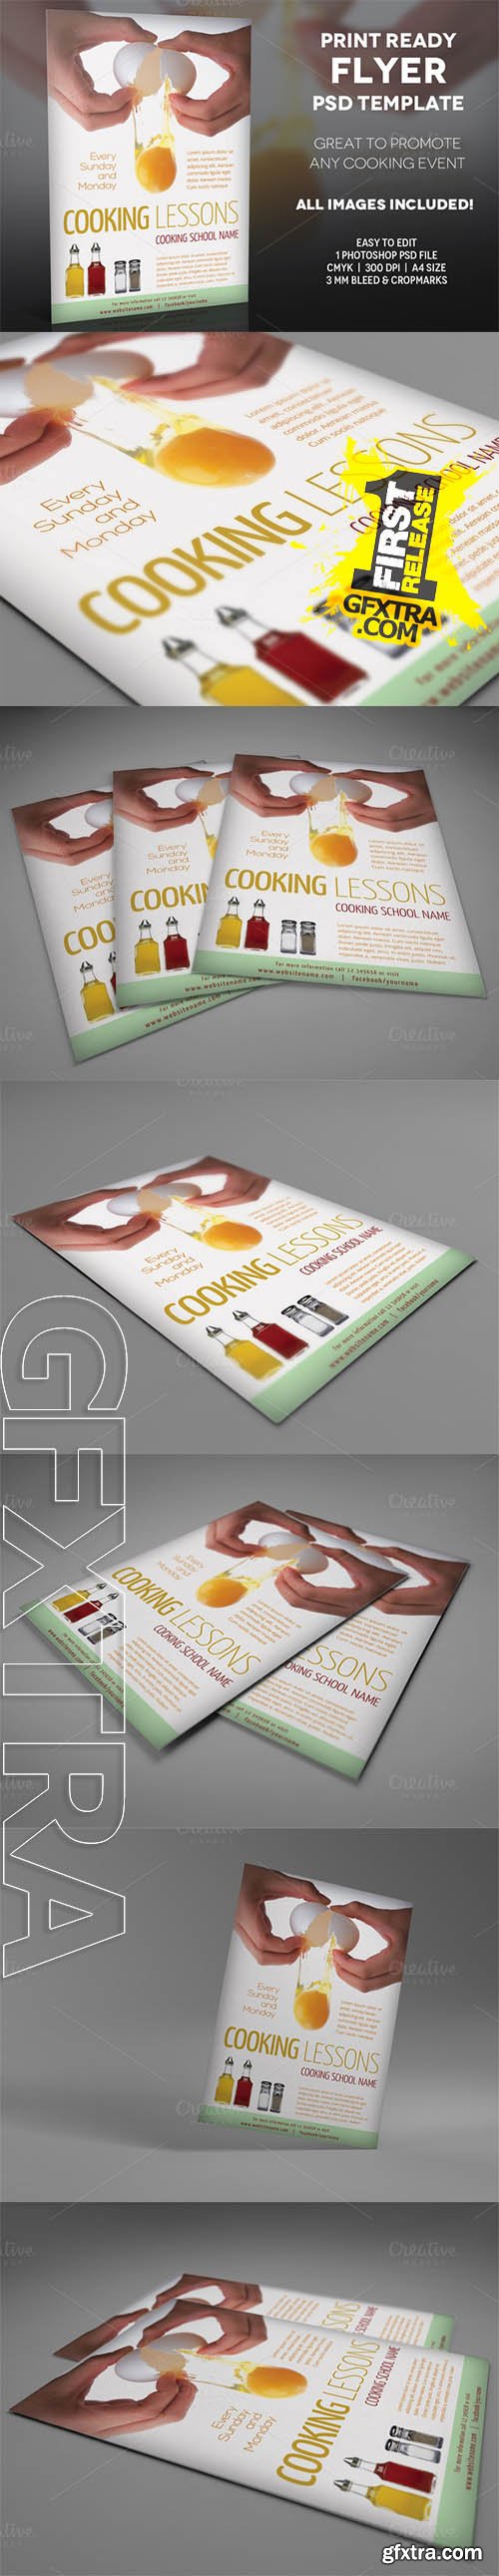 Cooking Lessons 2 - A4 Flyer Template - CM 195845